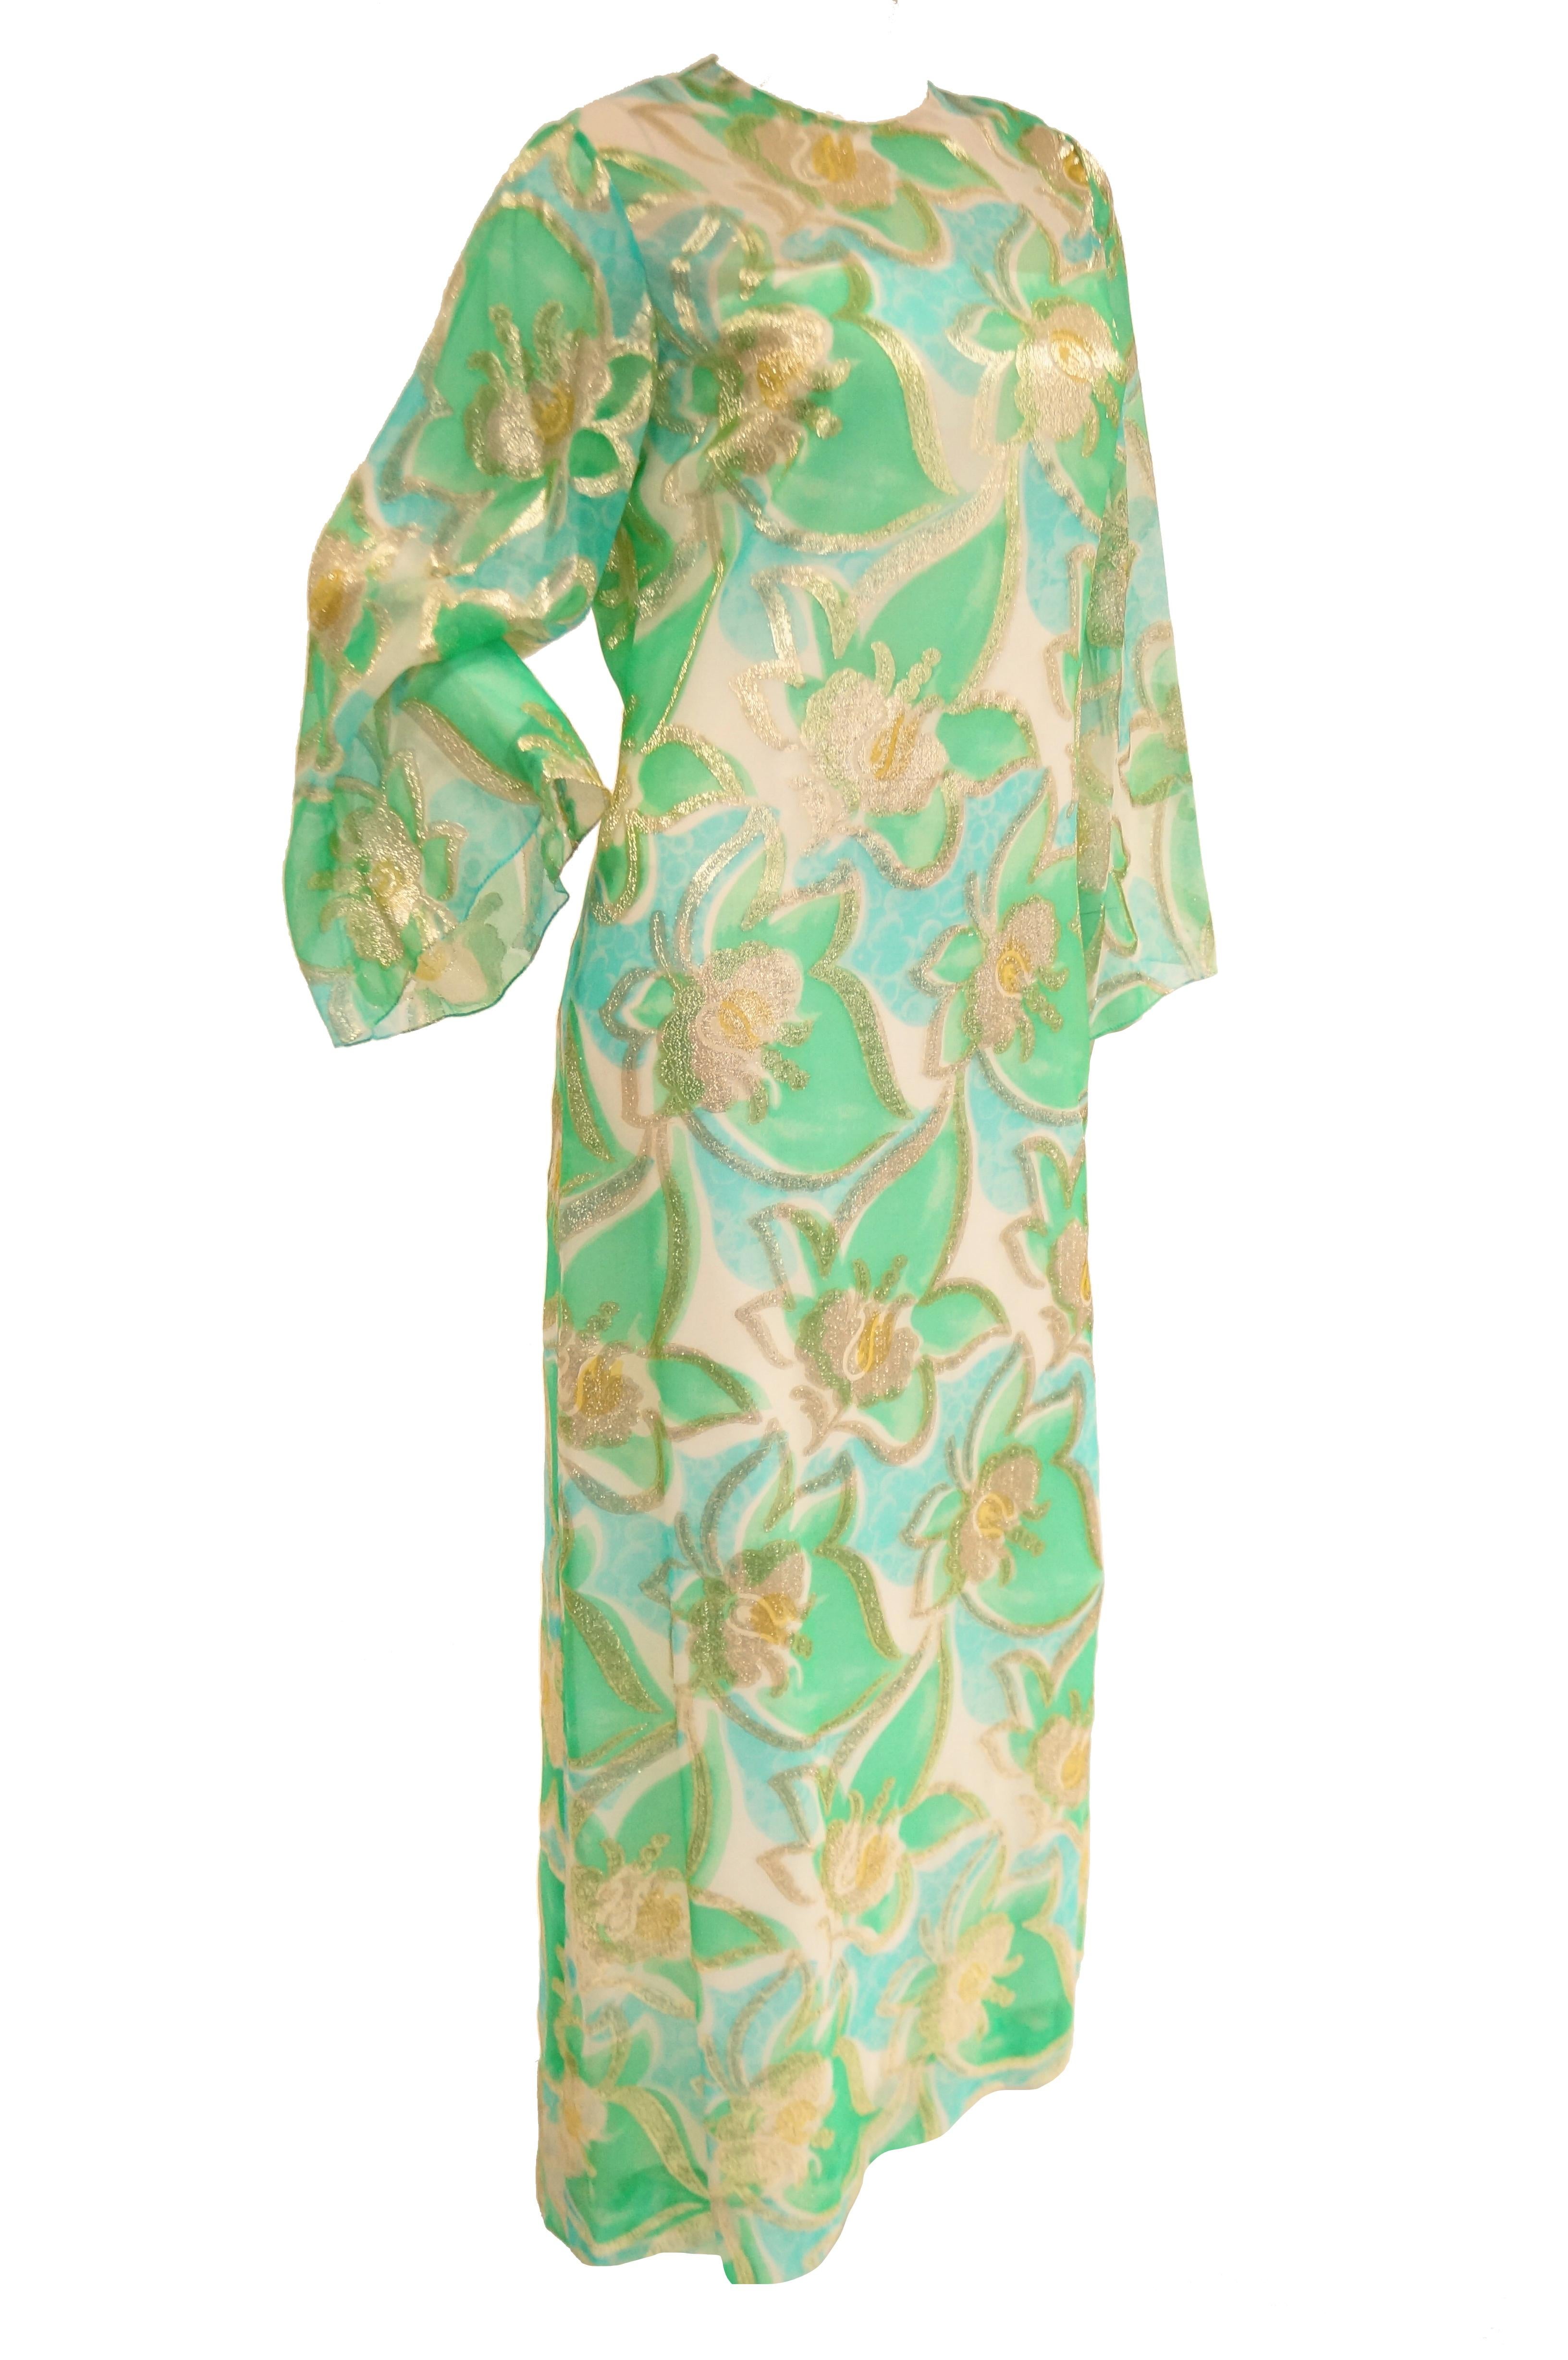 Women's or Men's 1960s Nat Kaplan Couture Green, Blue, and Gold Kaftan Dress For Sale